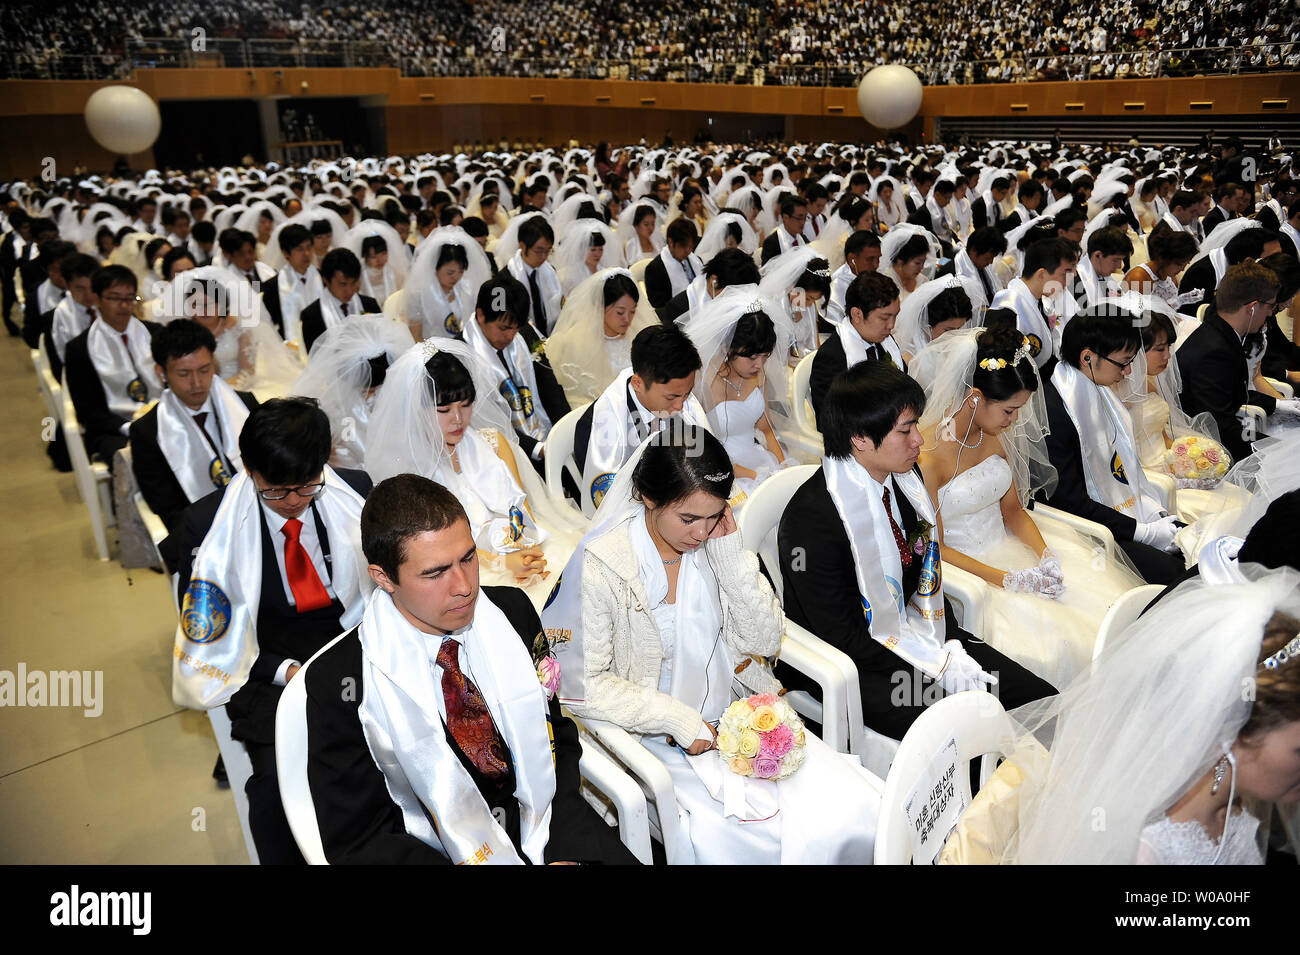 Newly married couples pray during a Blessing Ceremony of the Family Federation for World Peace and Unification at the CheongShim Peace World Center in Gapyeong, South Korea, on February 20, 2016.     Photo by keizo Mori Stock Photo